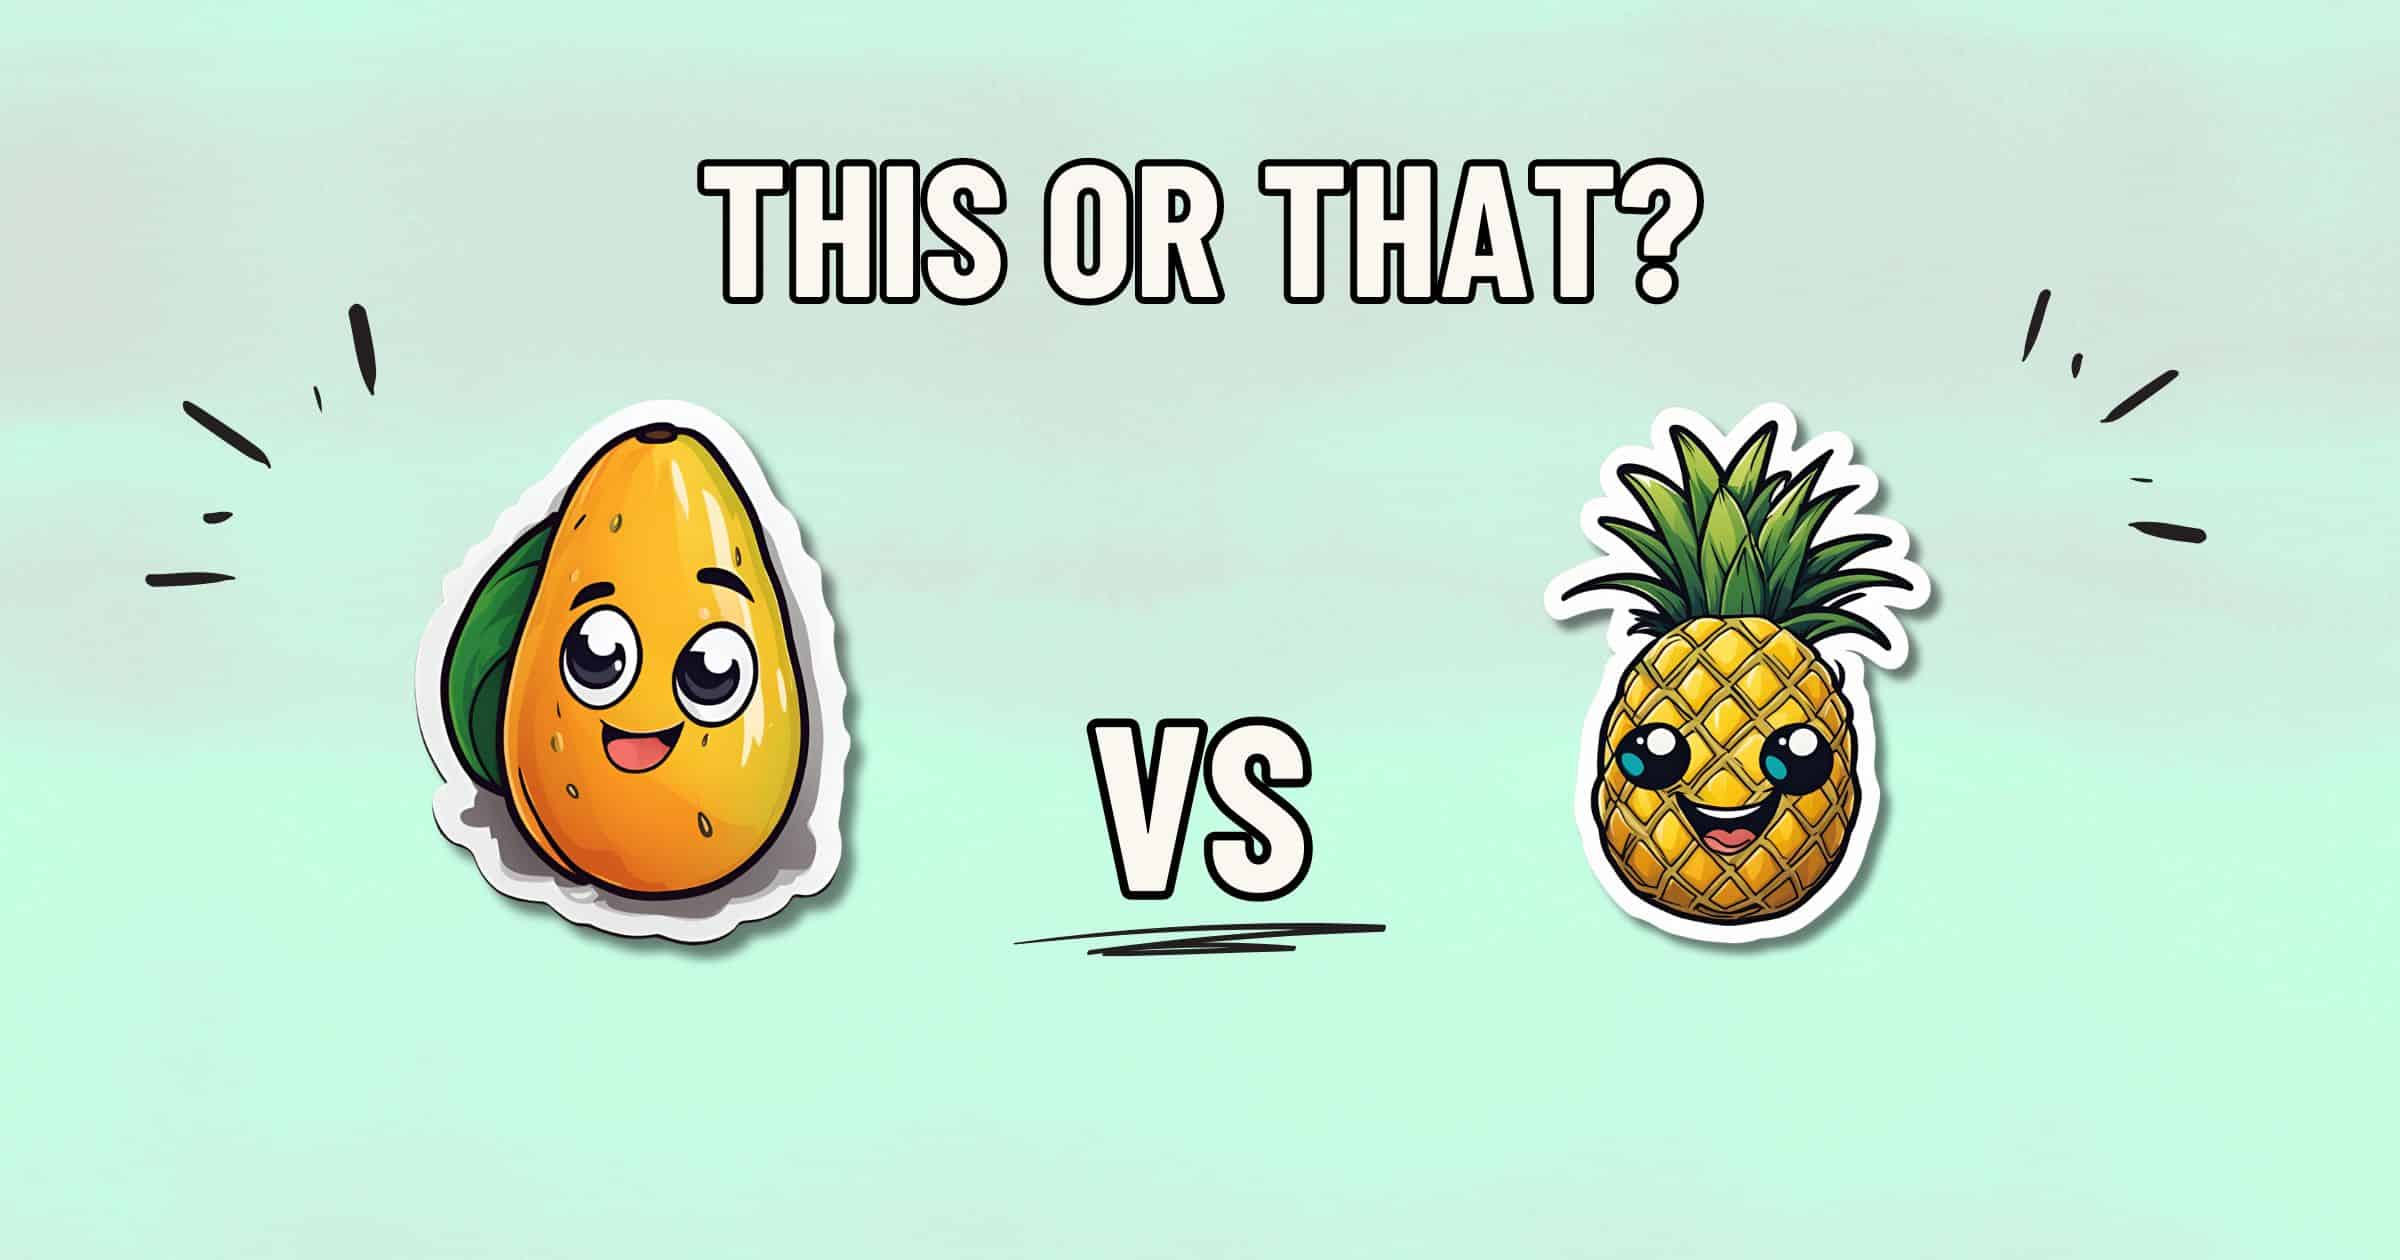 An illustrated image featuring a cute, smiling mango on the left and an adorable, grinning pineapple on the right. Text at the top reads "THIS OR THAT?" with "VS" in the center, hinting at a playful comparison between which is healthier: mango or pineapple.